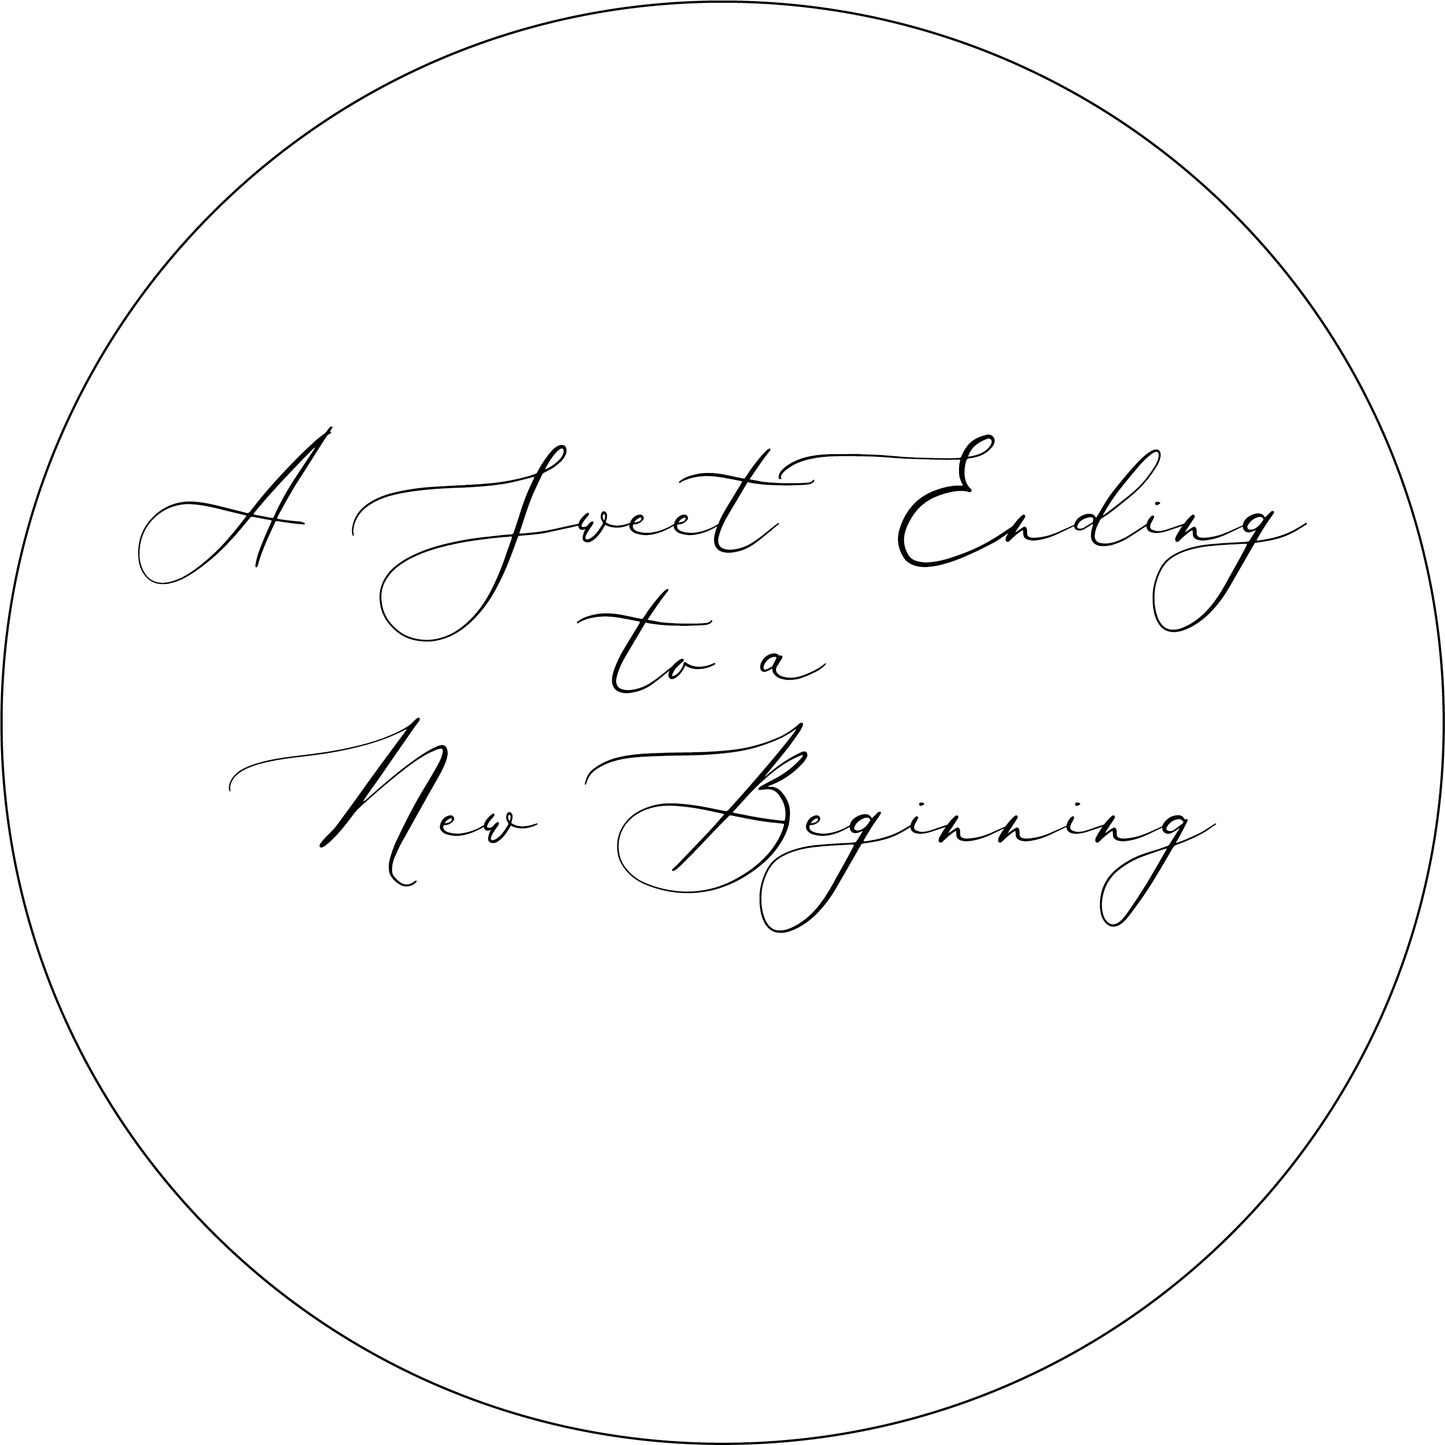 A Sweet Ending to a New Beginning Stickers Minimalist Script